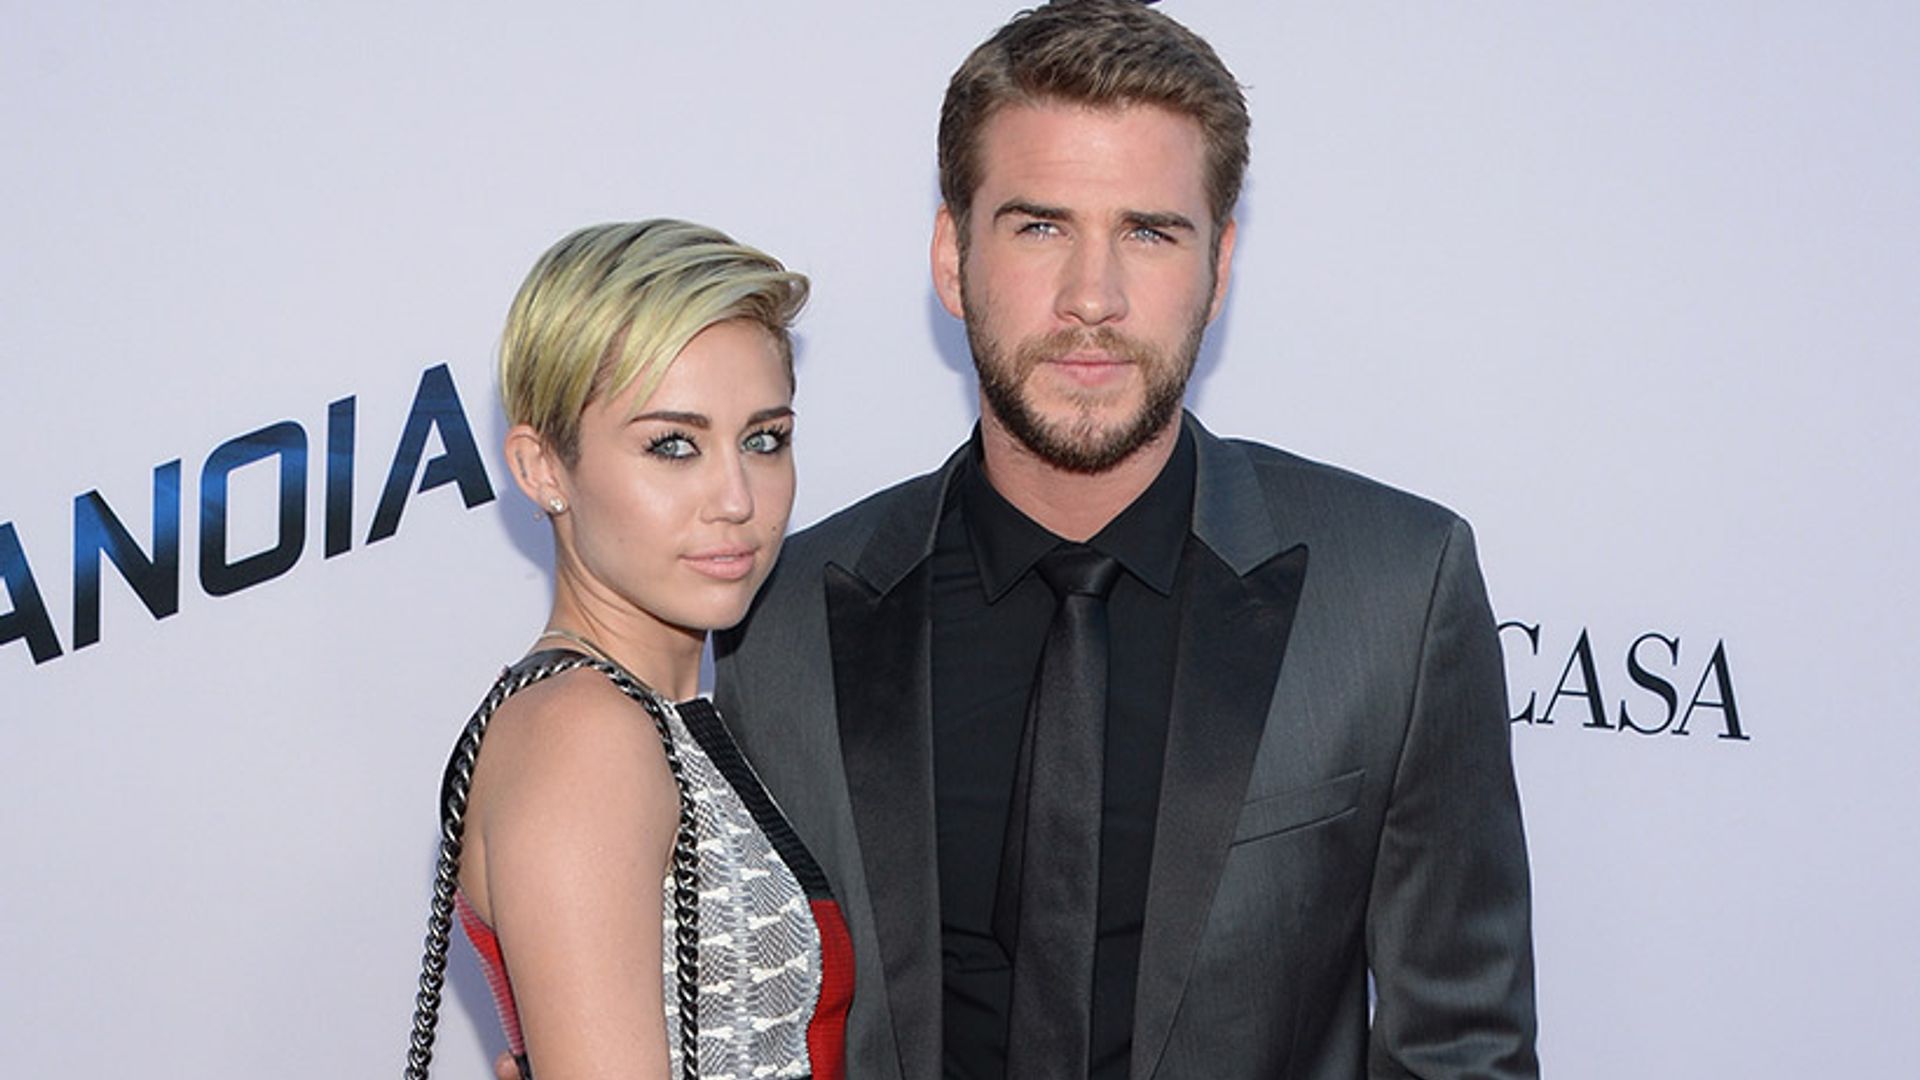 Is Miley Cyrus' new tattoo a tribute to Liam Hemsworth?